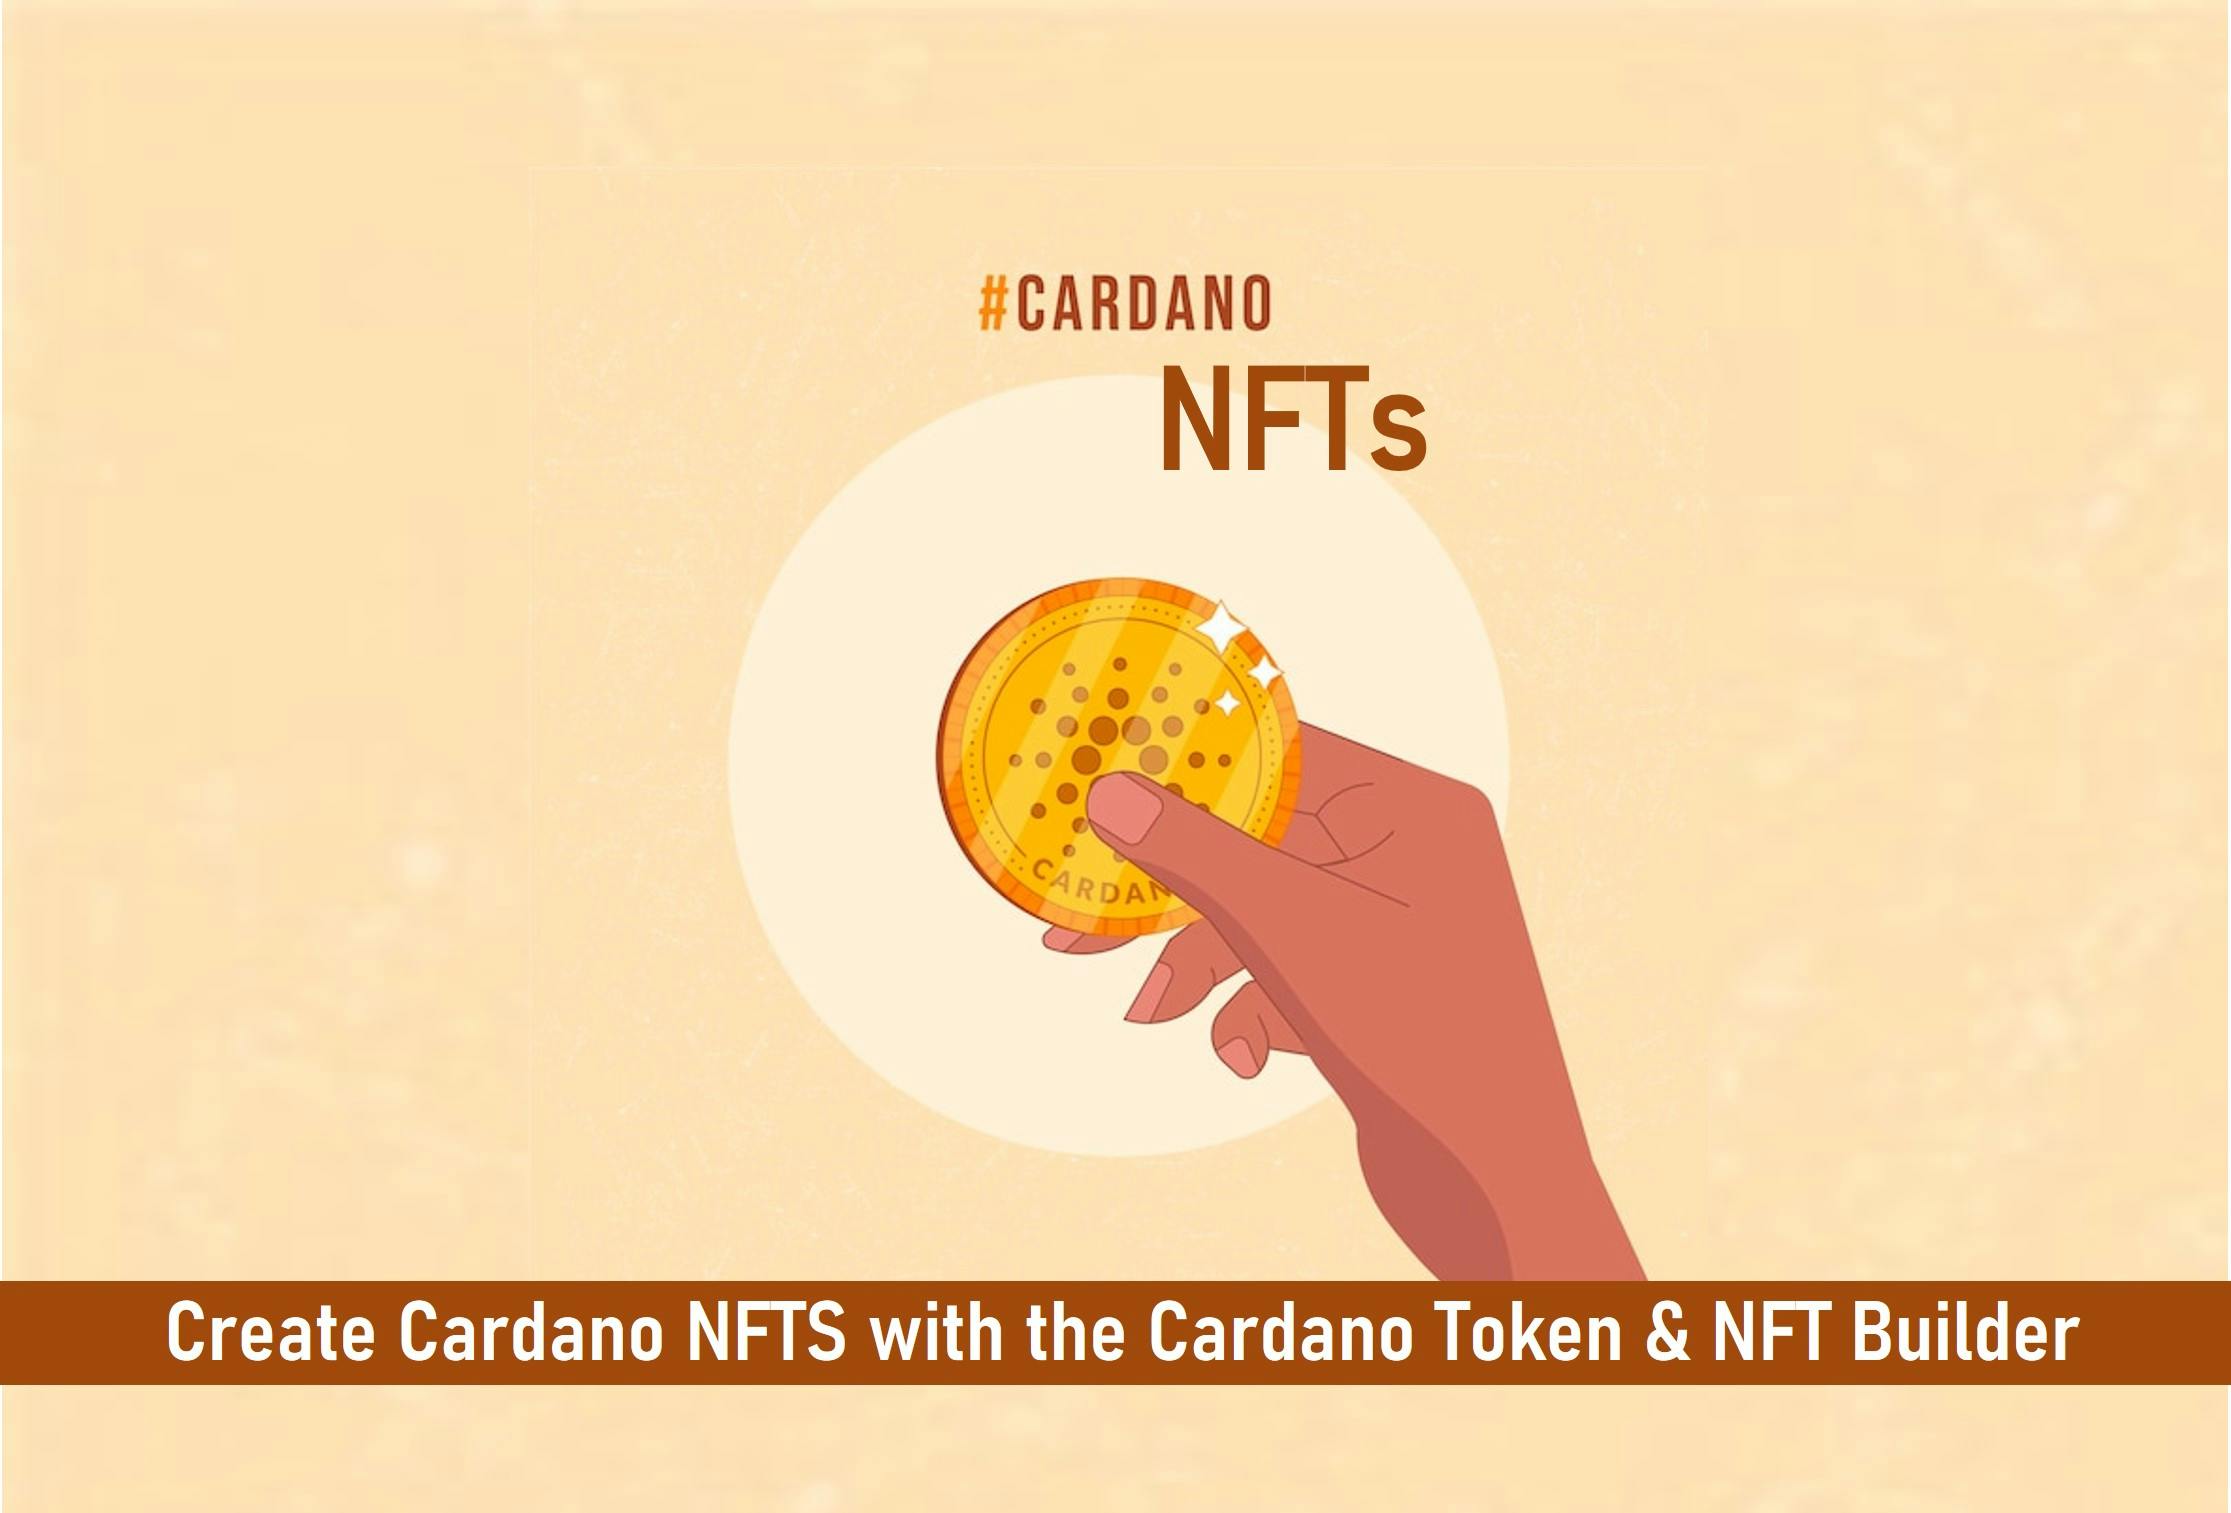 How to Create Cardano NFTS with the Cardano Token & NFT Builder